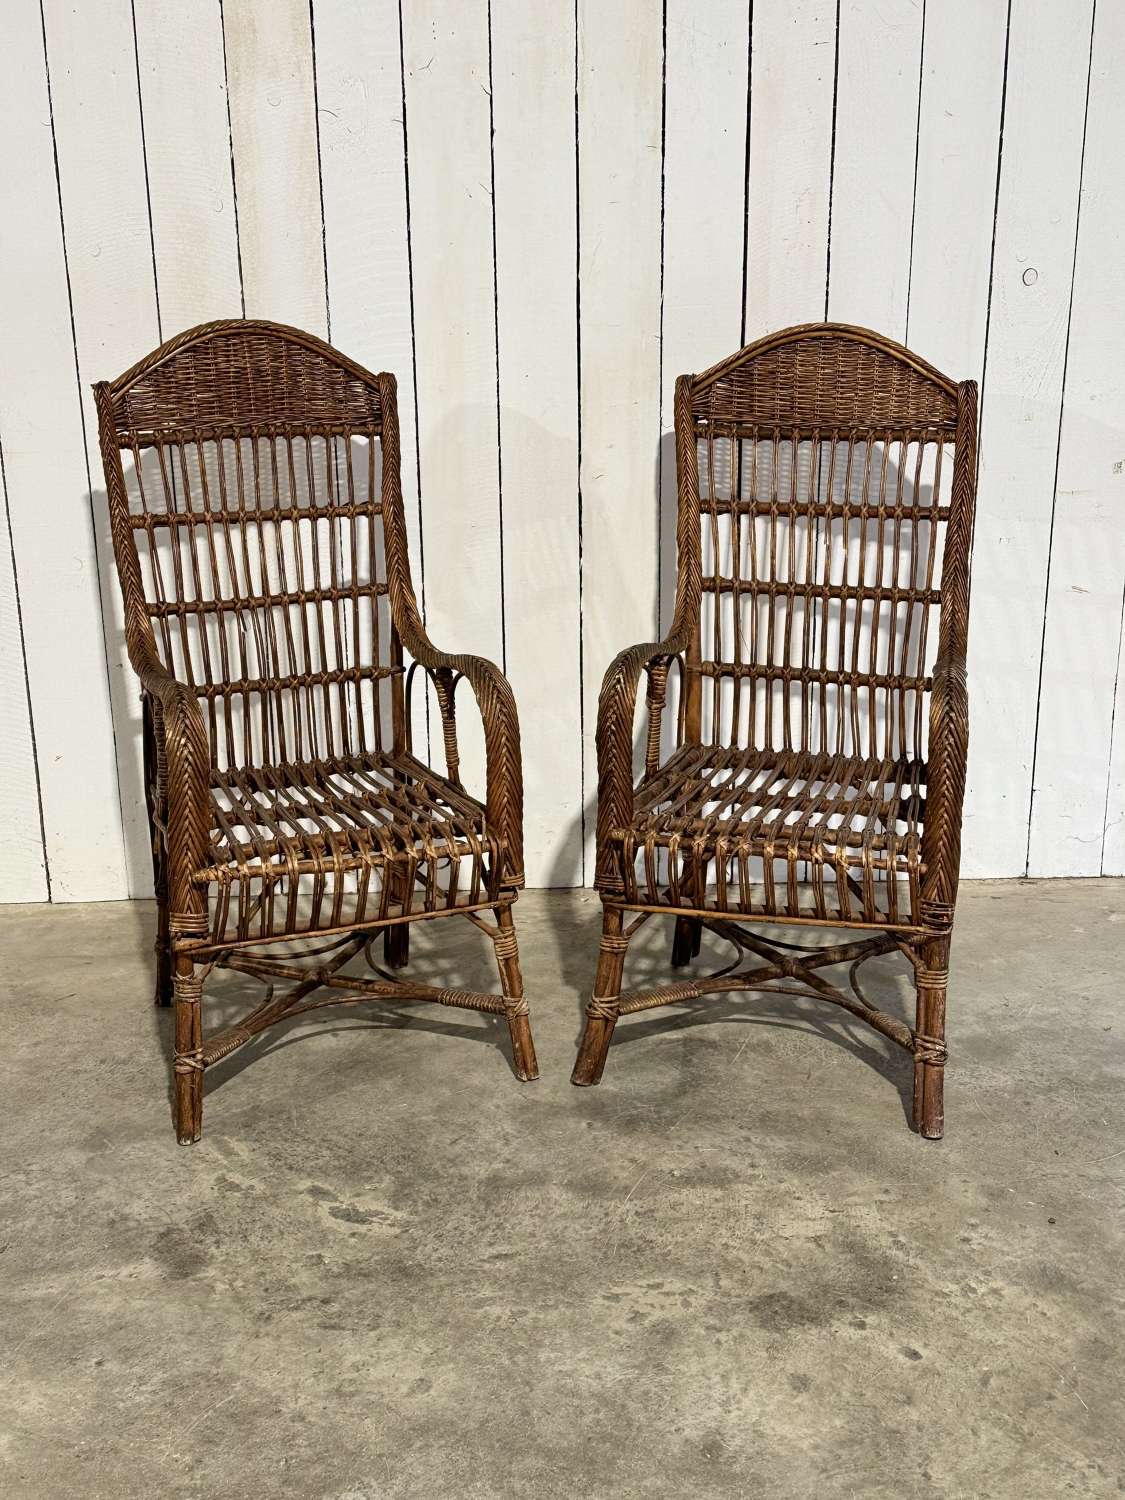 A pair of 20th century wicker chairs